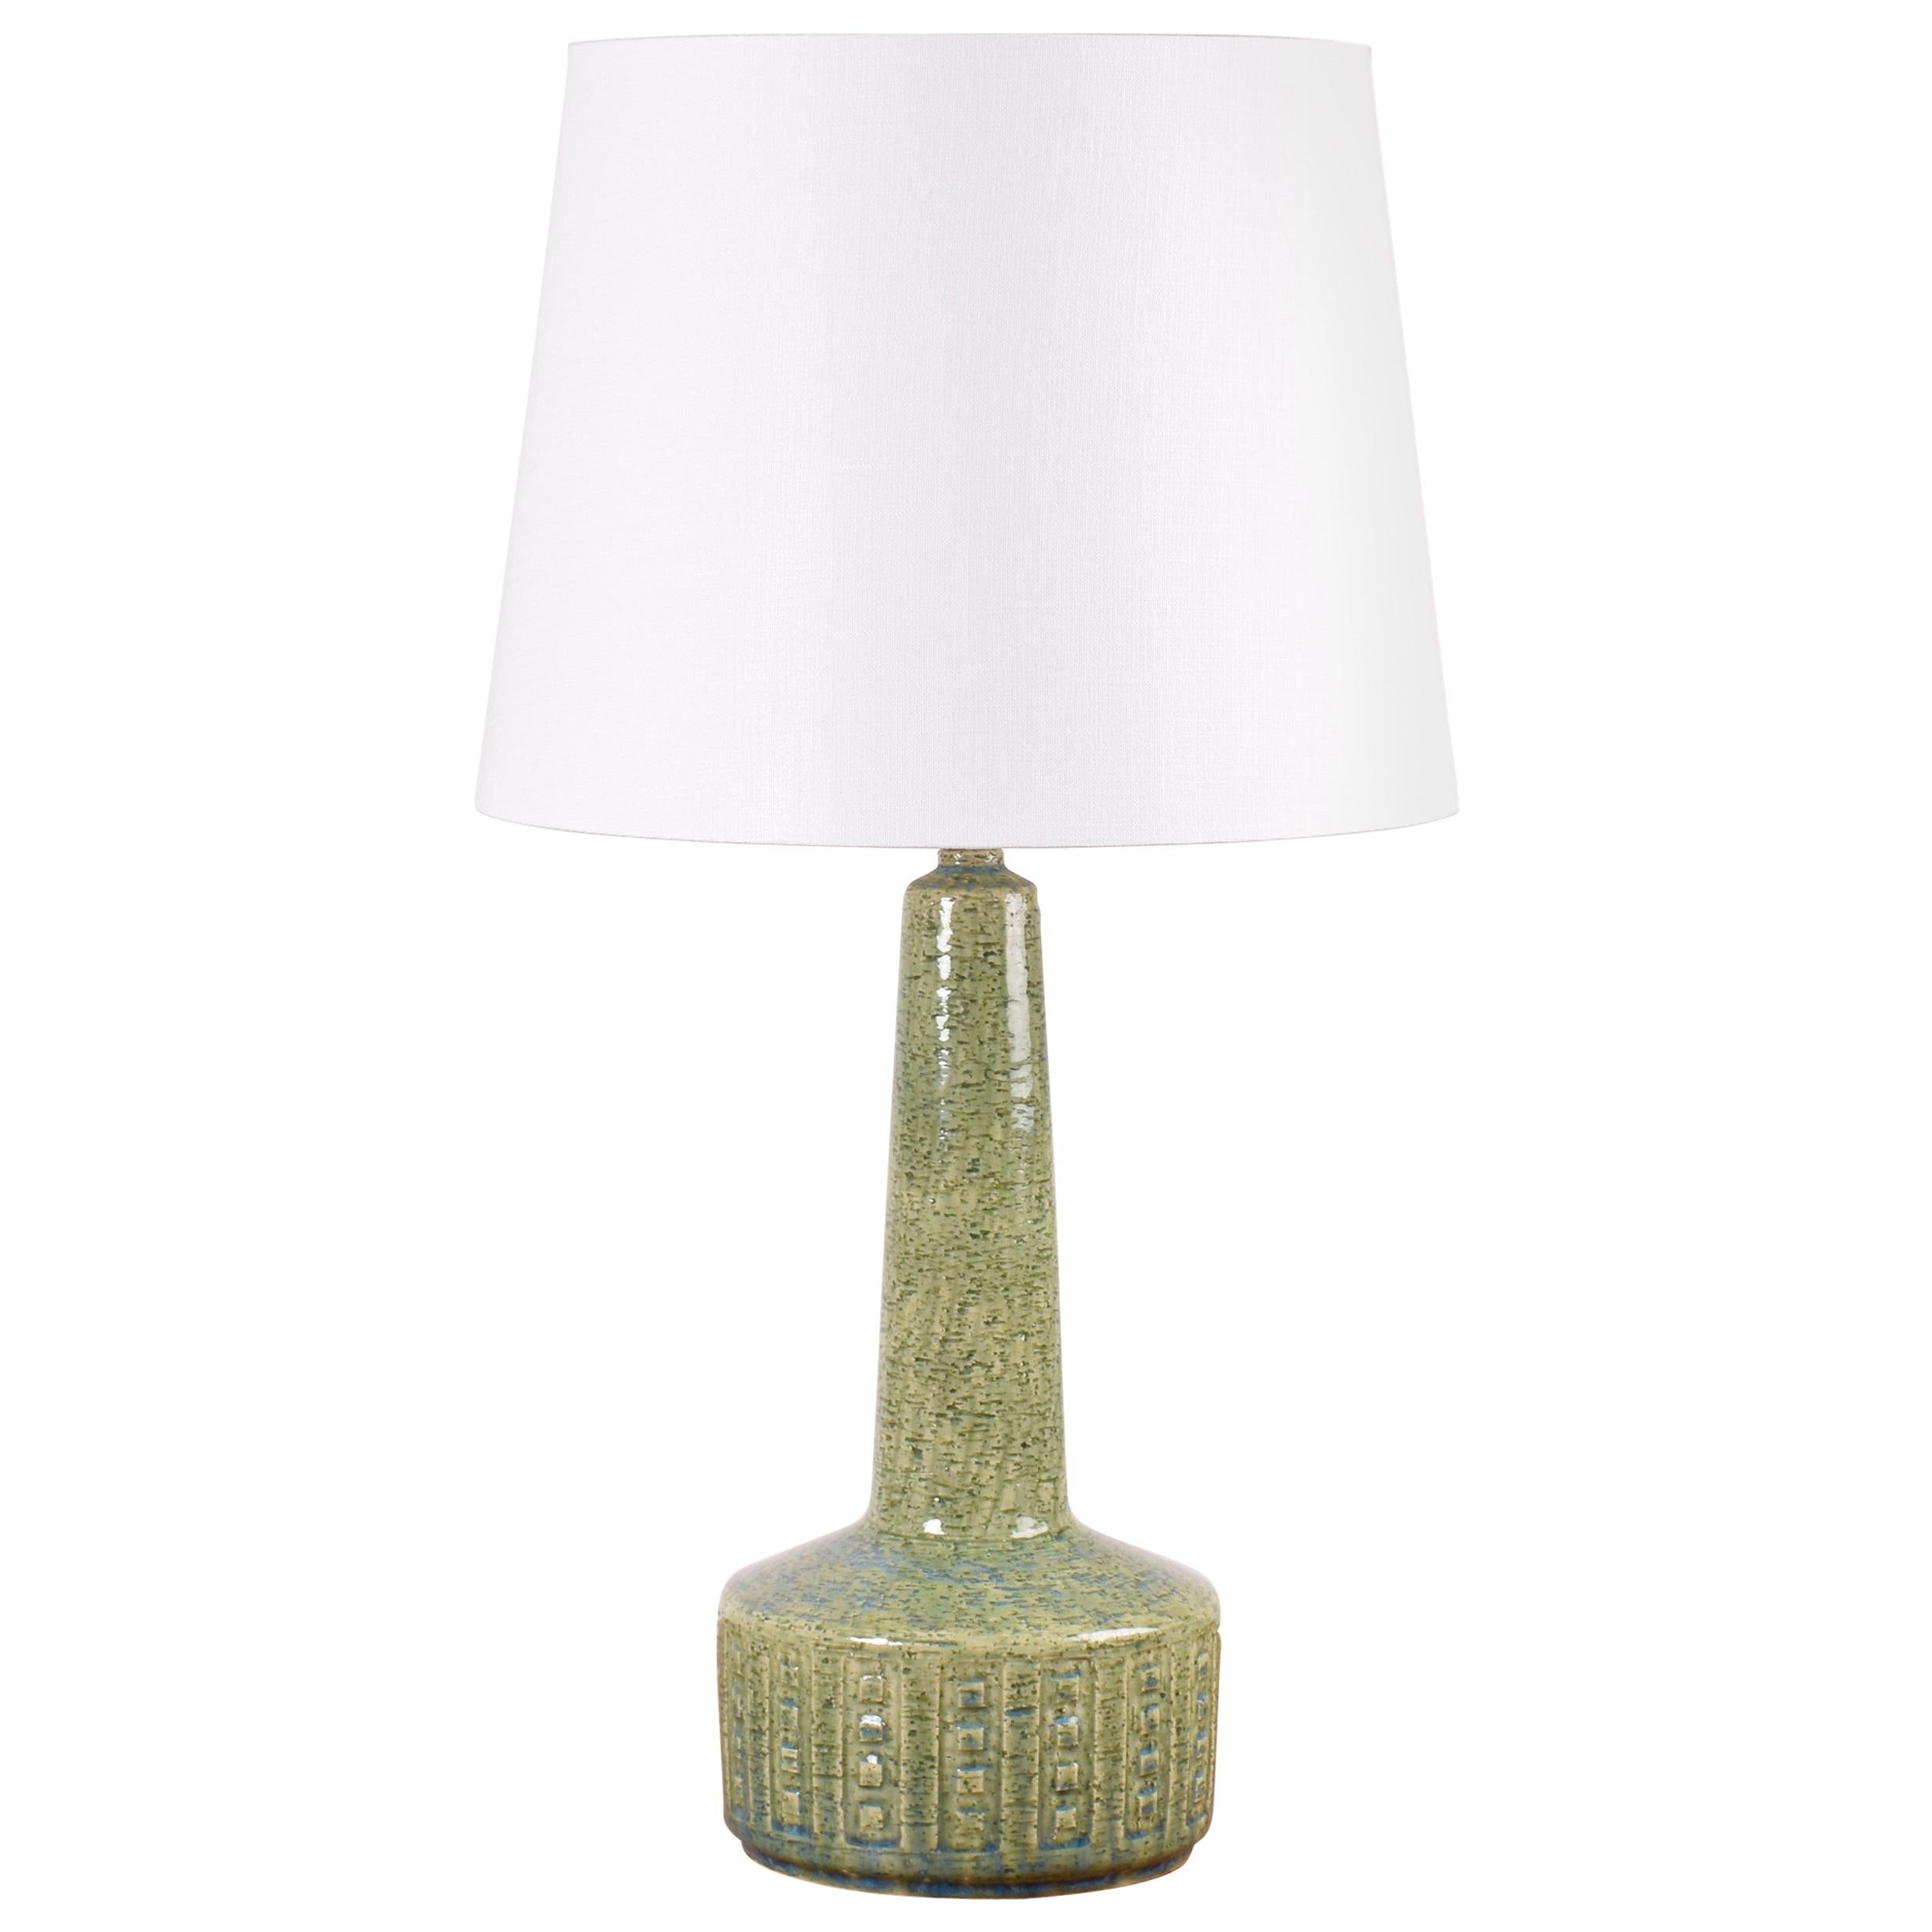 Danish Midcentury Palshus Tall Green Blue Table Lamp with New Lampshade, 1960s